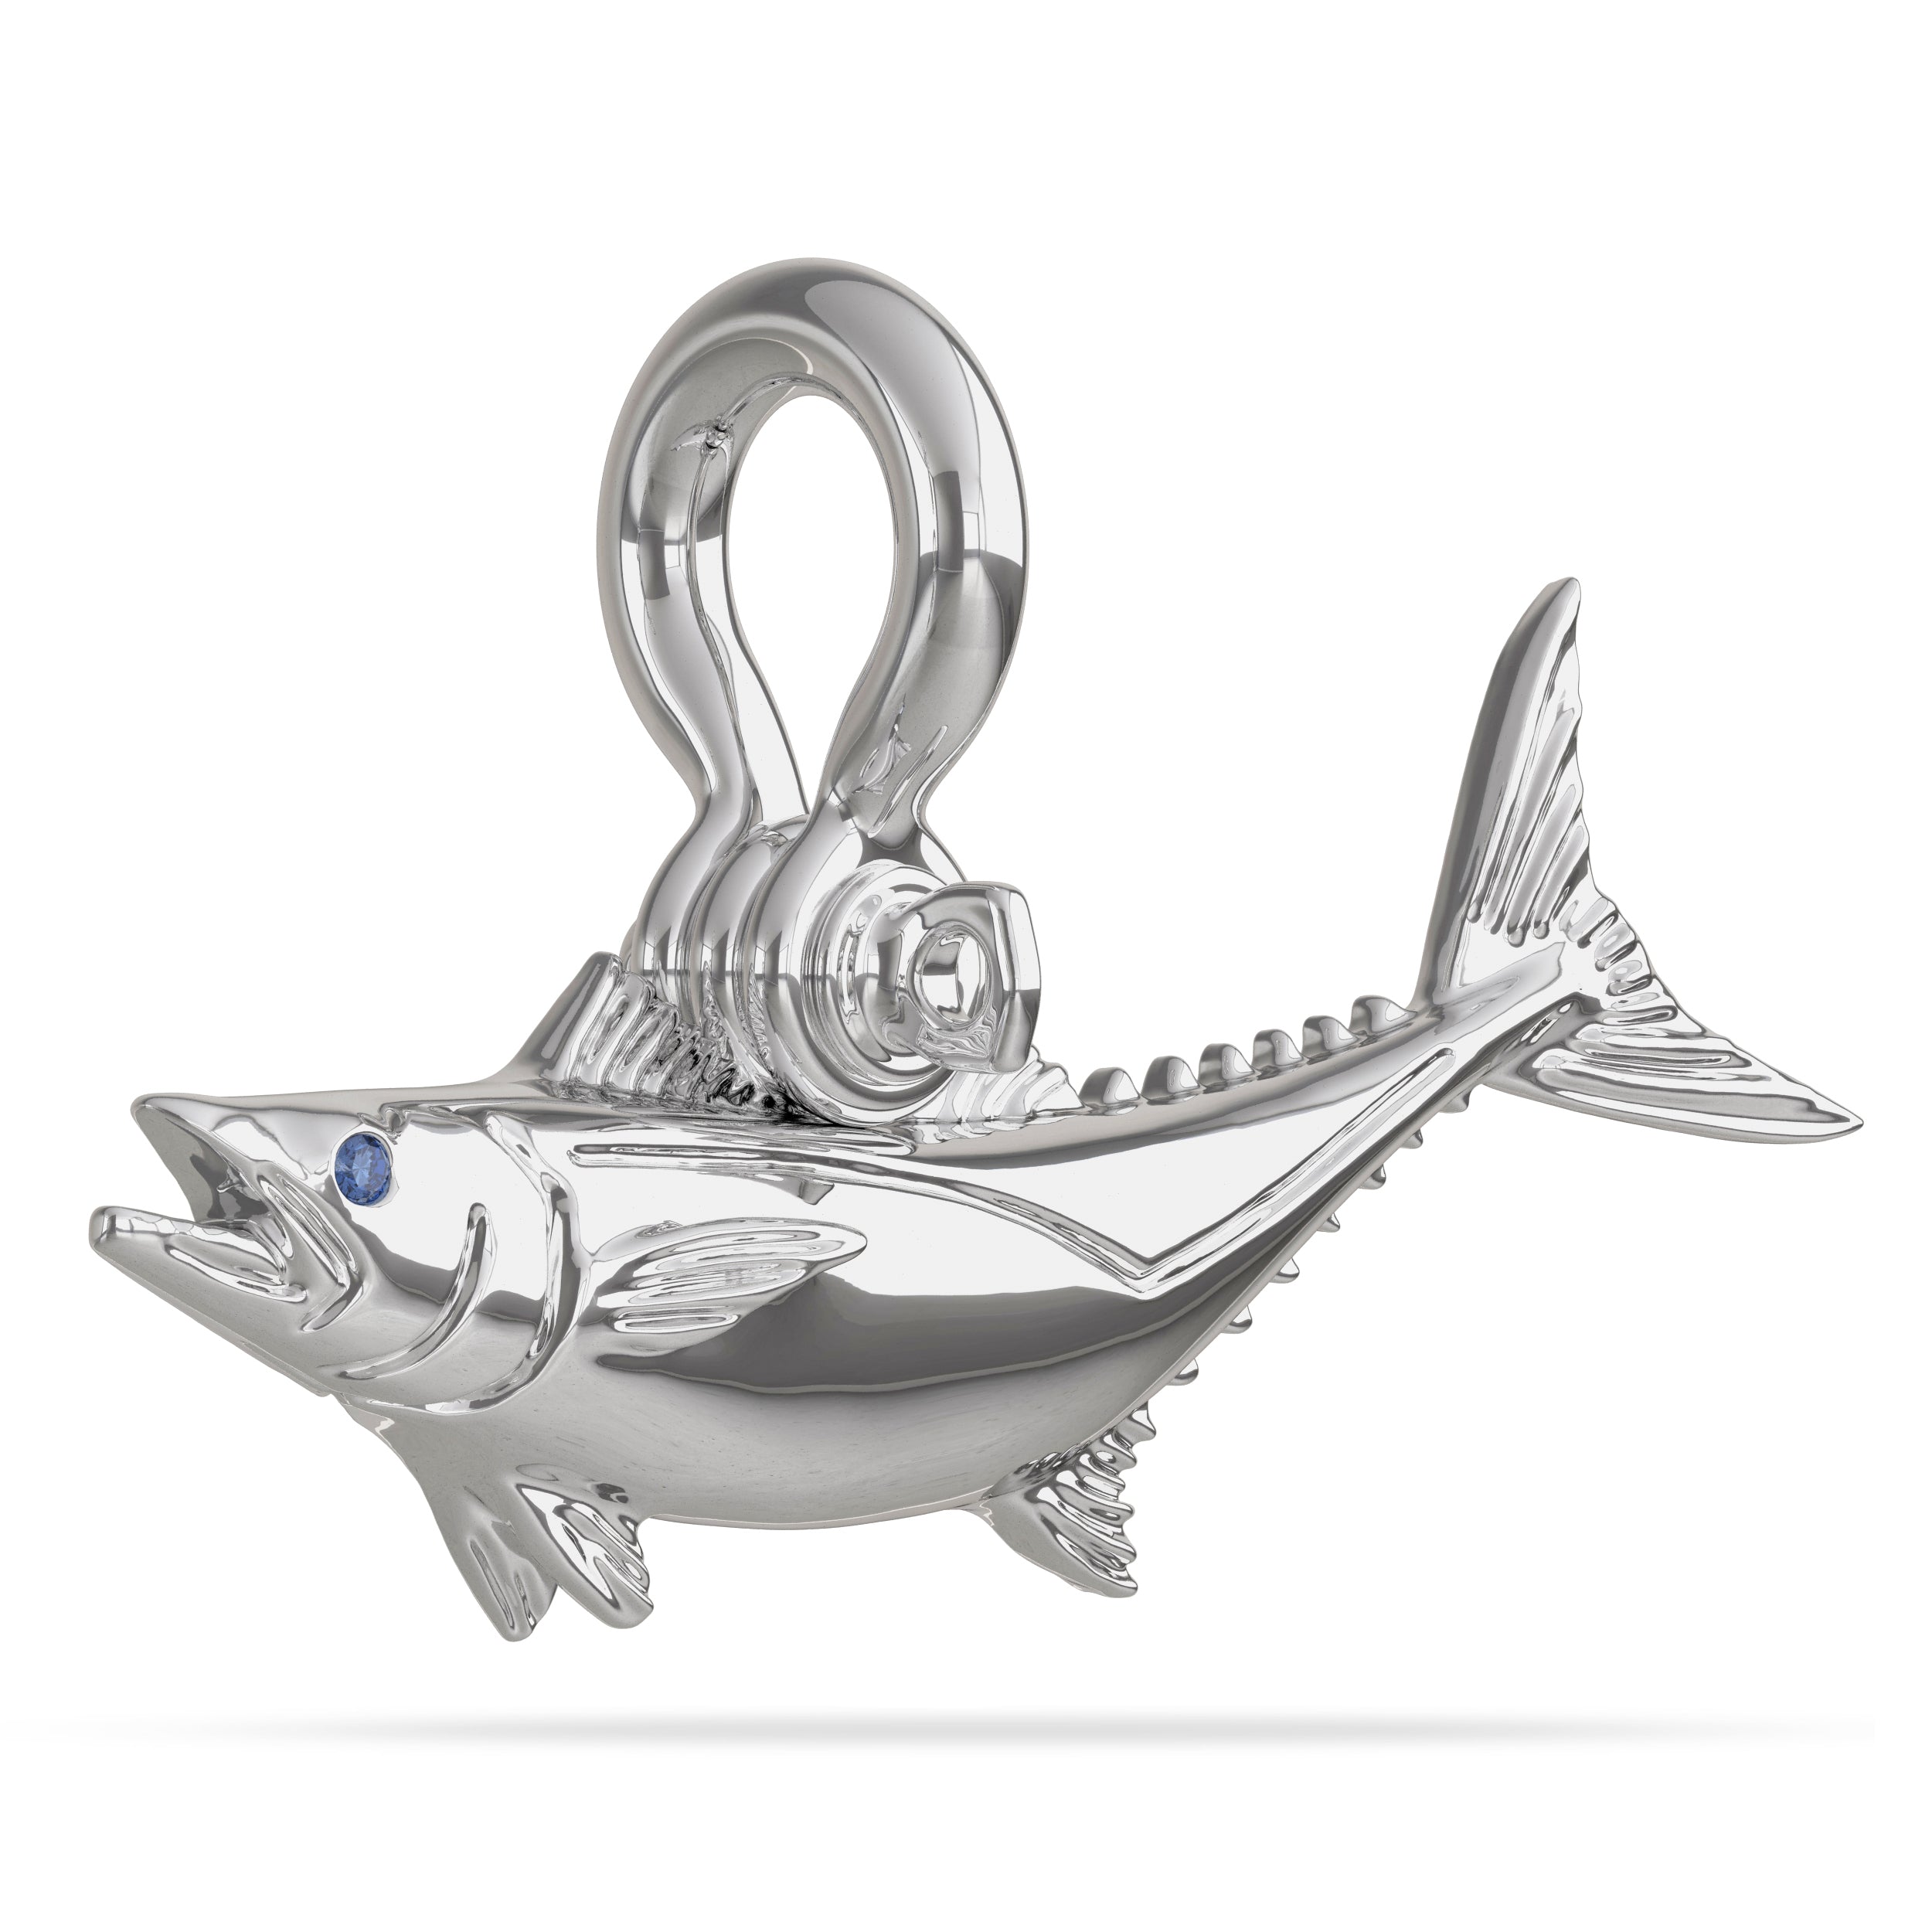 Sterling Silver Kingfish Mackerel Fish High Polished Mirror Finish With Blue Sapphire Eye with A Mariner Shackle Bail Custom Designed By Nautical Treasure Jewelry In The Florida Keys SKA 